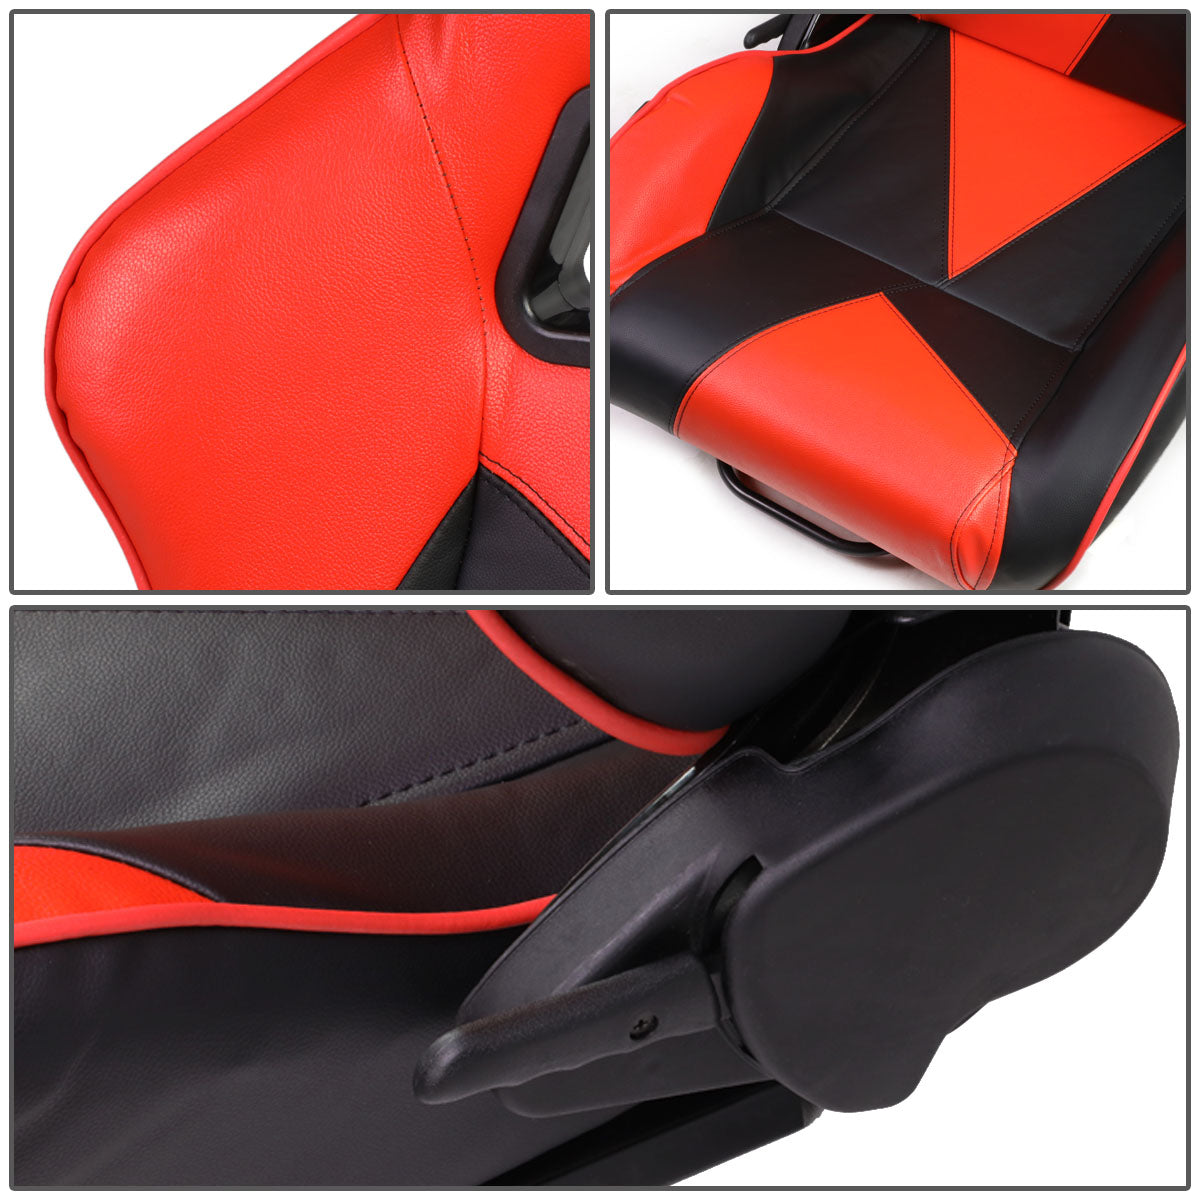 Racing Seats - Reclinable - Triangle Pattern - PVC Leather - Pair